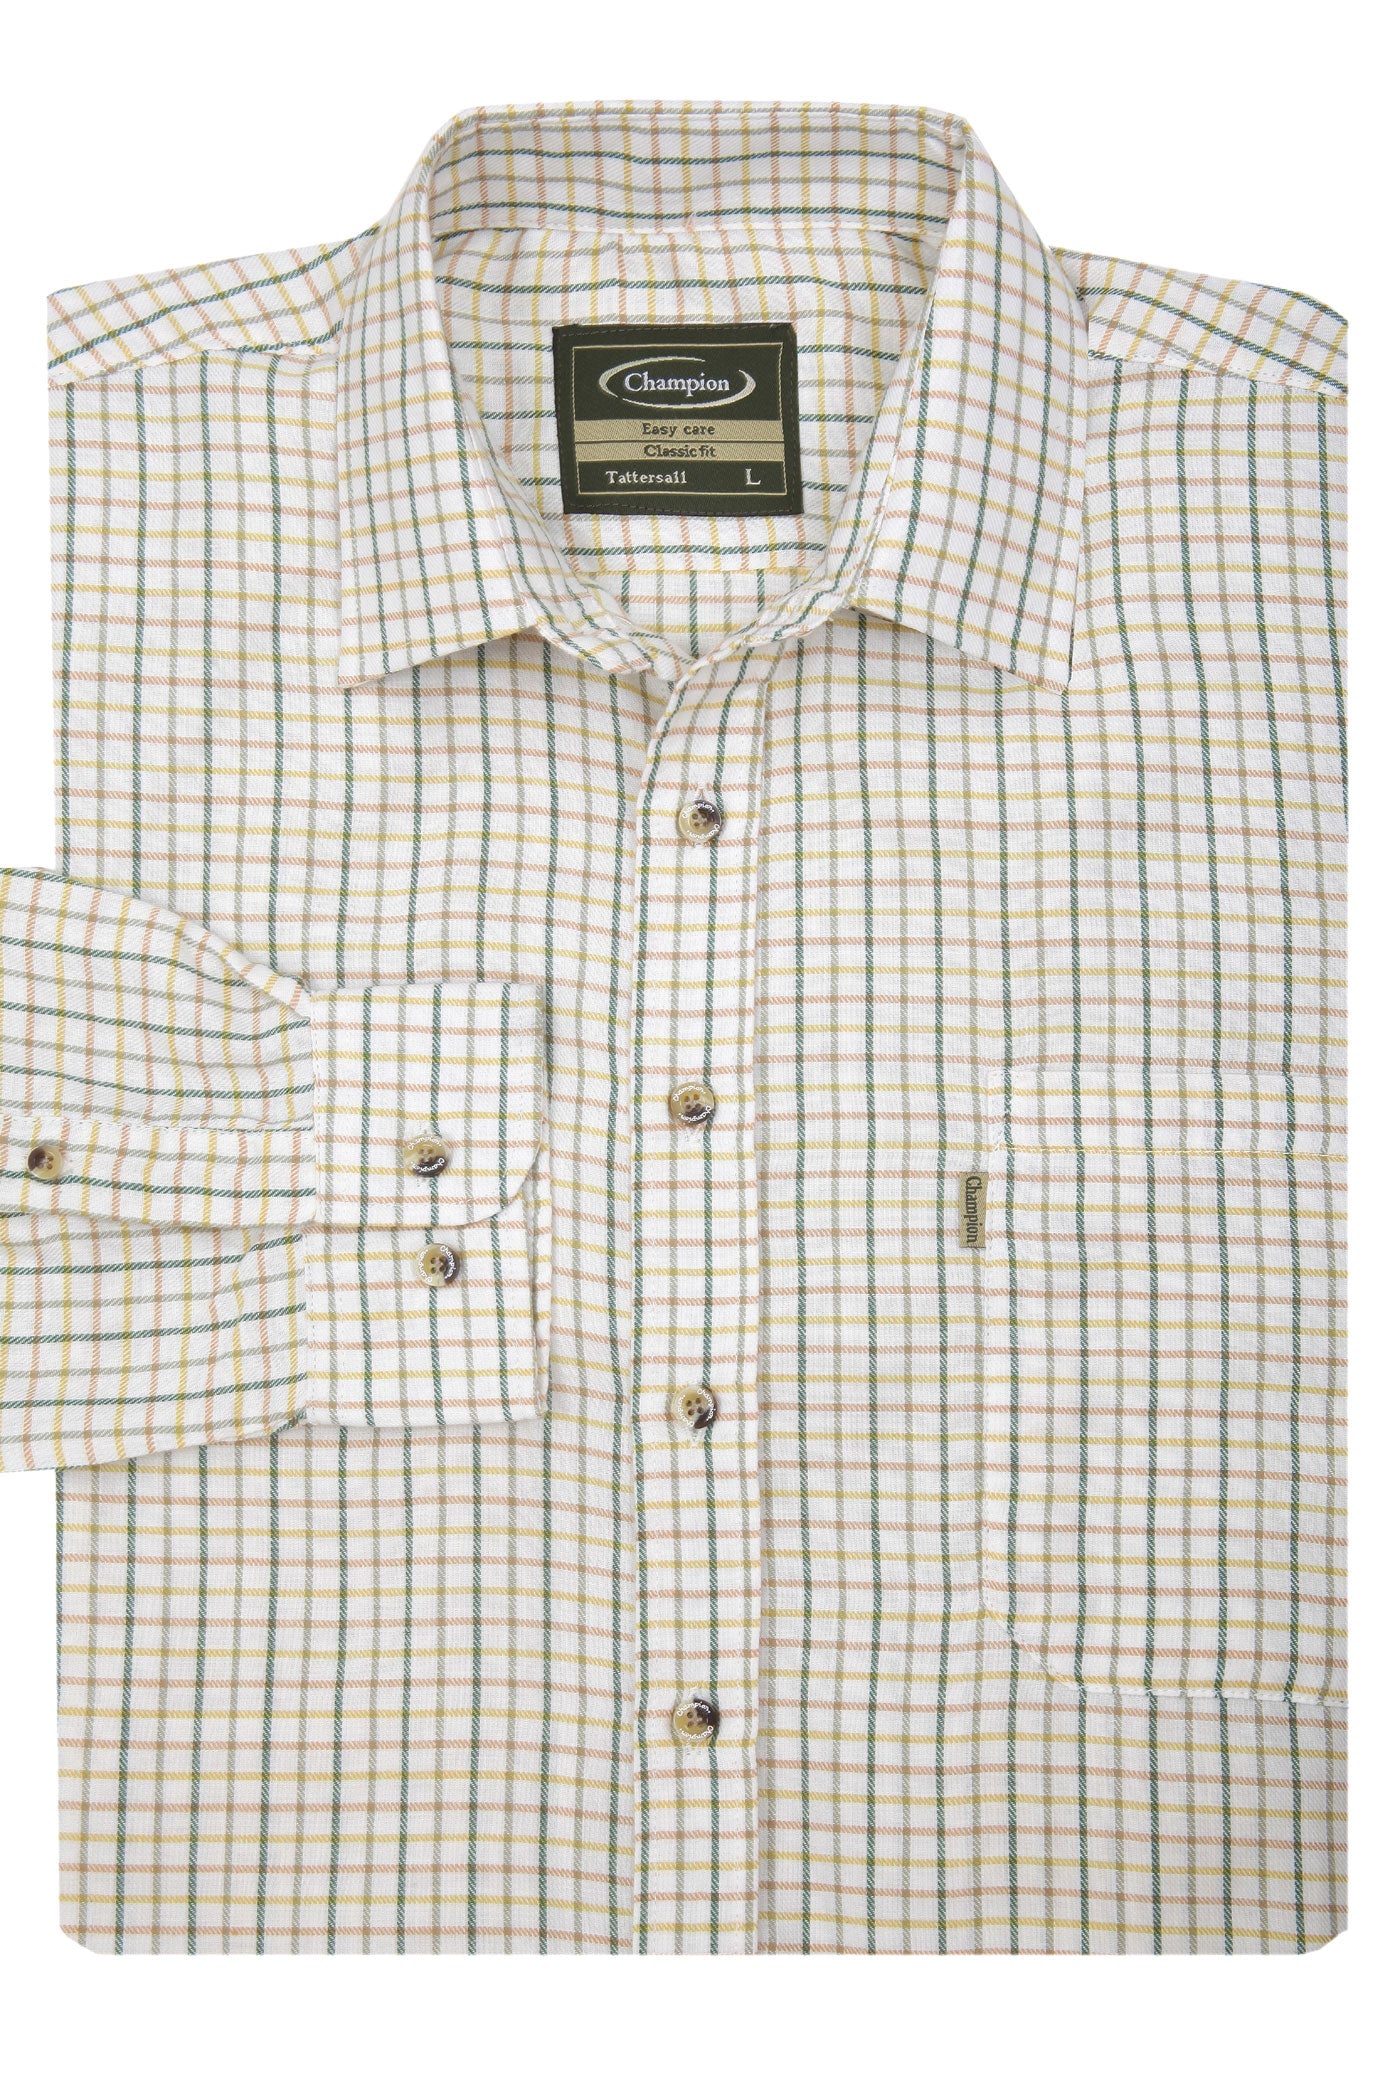 Champion Tattersall Check Shirt - Hollands Country Clothing 